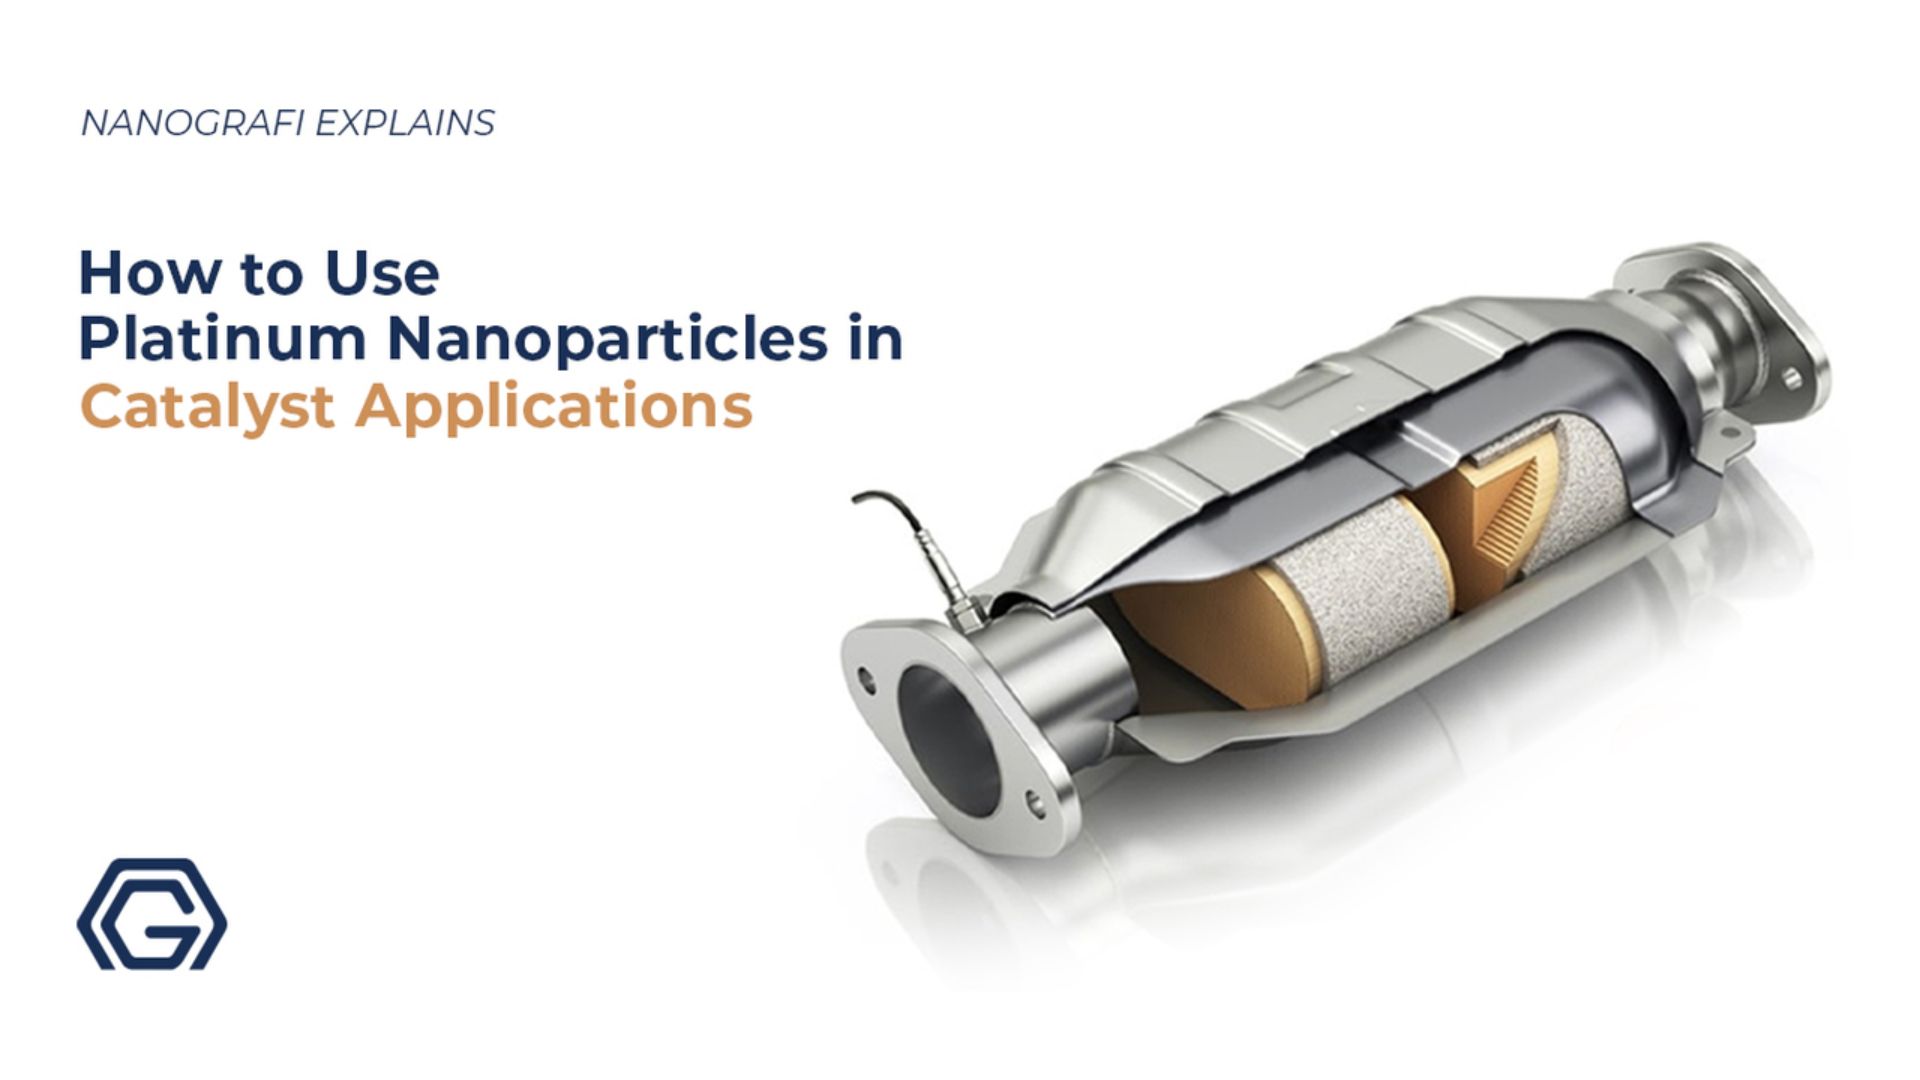 How to use platinum nanoparticles